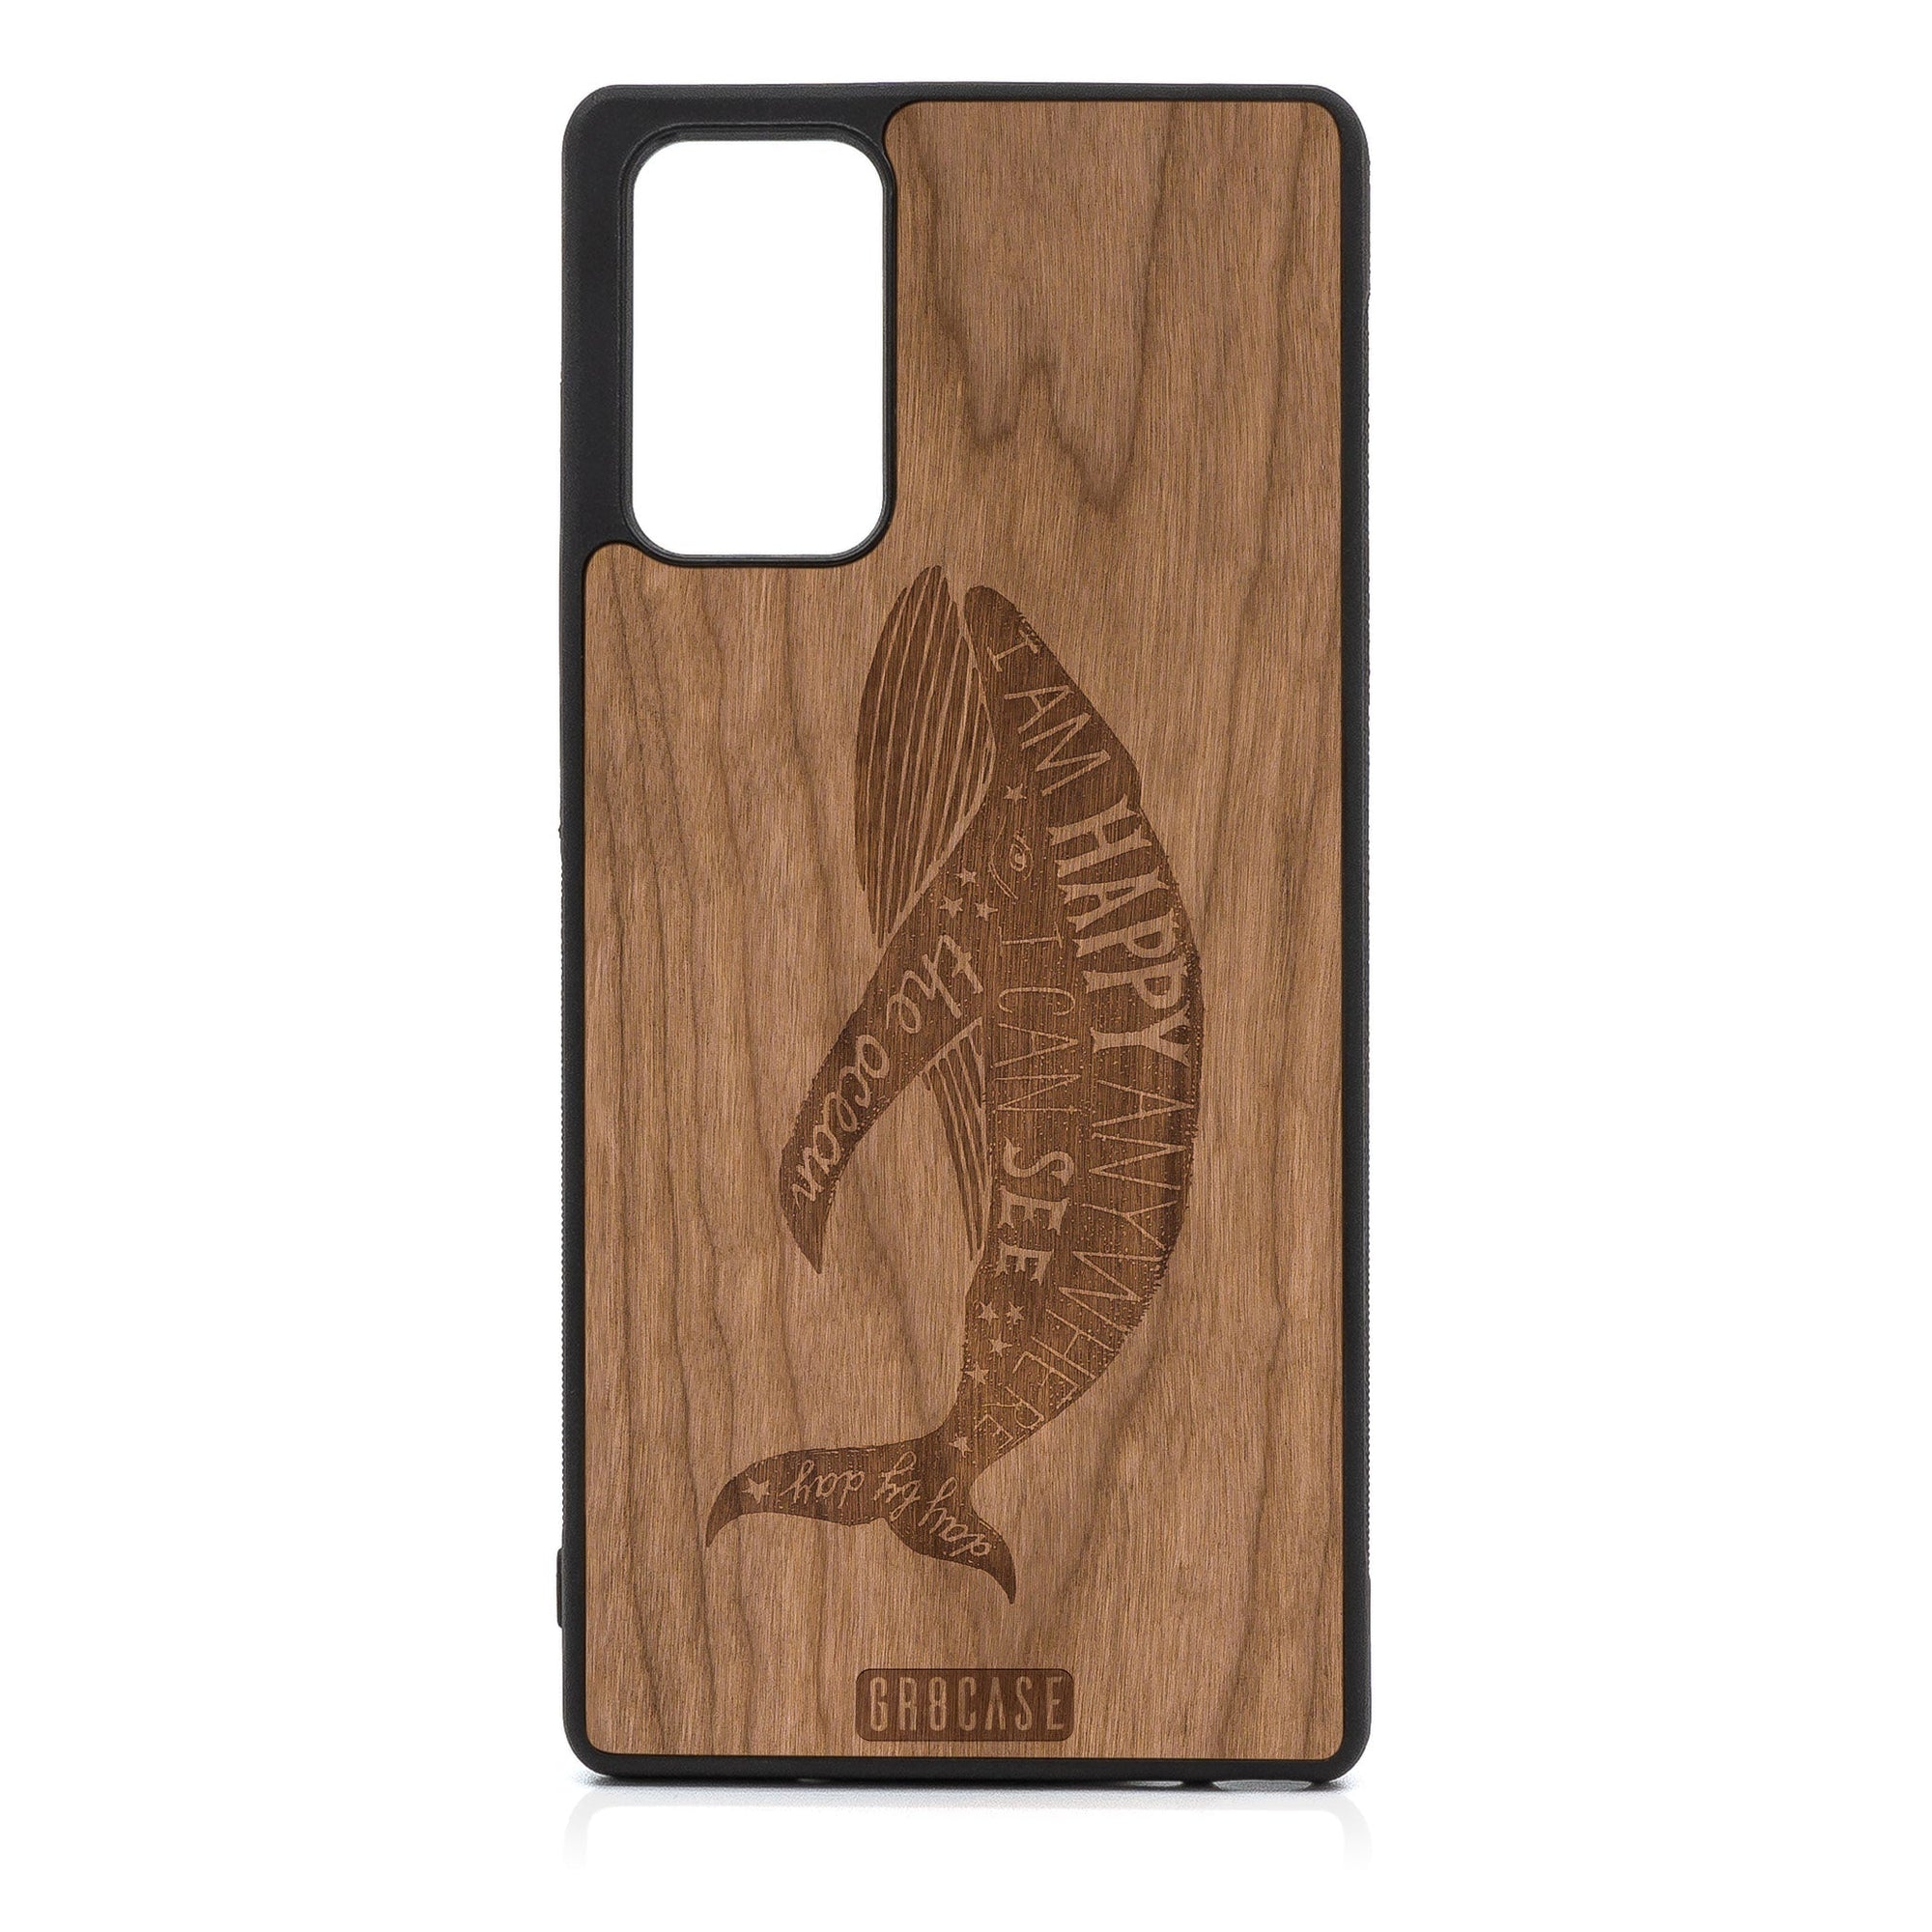 I'm Happy Anywhere I Can See The Ocean (Whale) Design Wood Case For Samsung Galaxy A73 5G